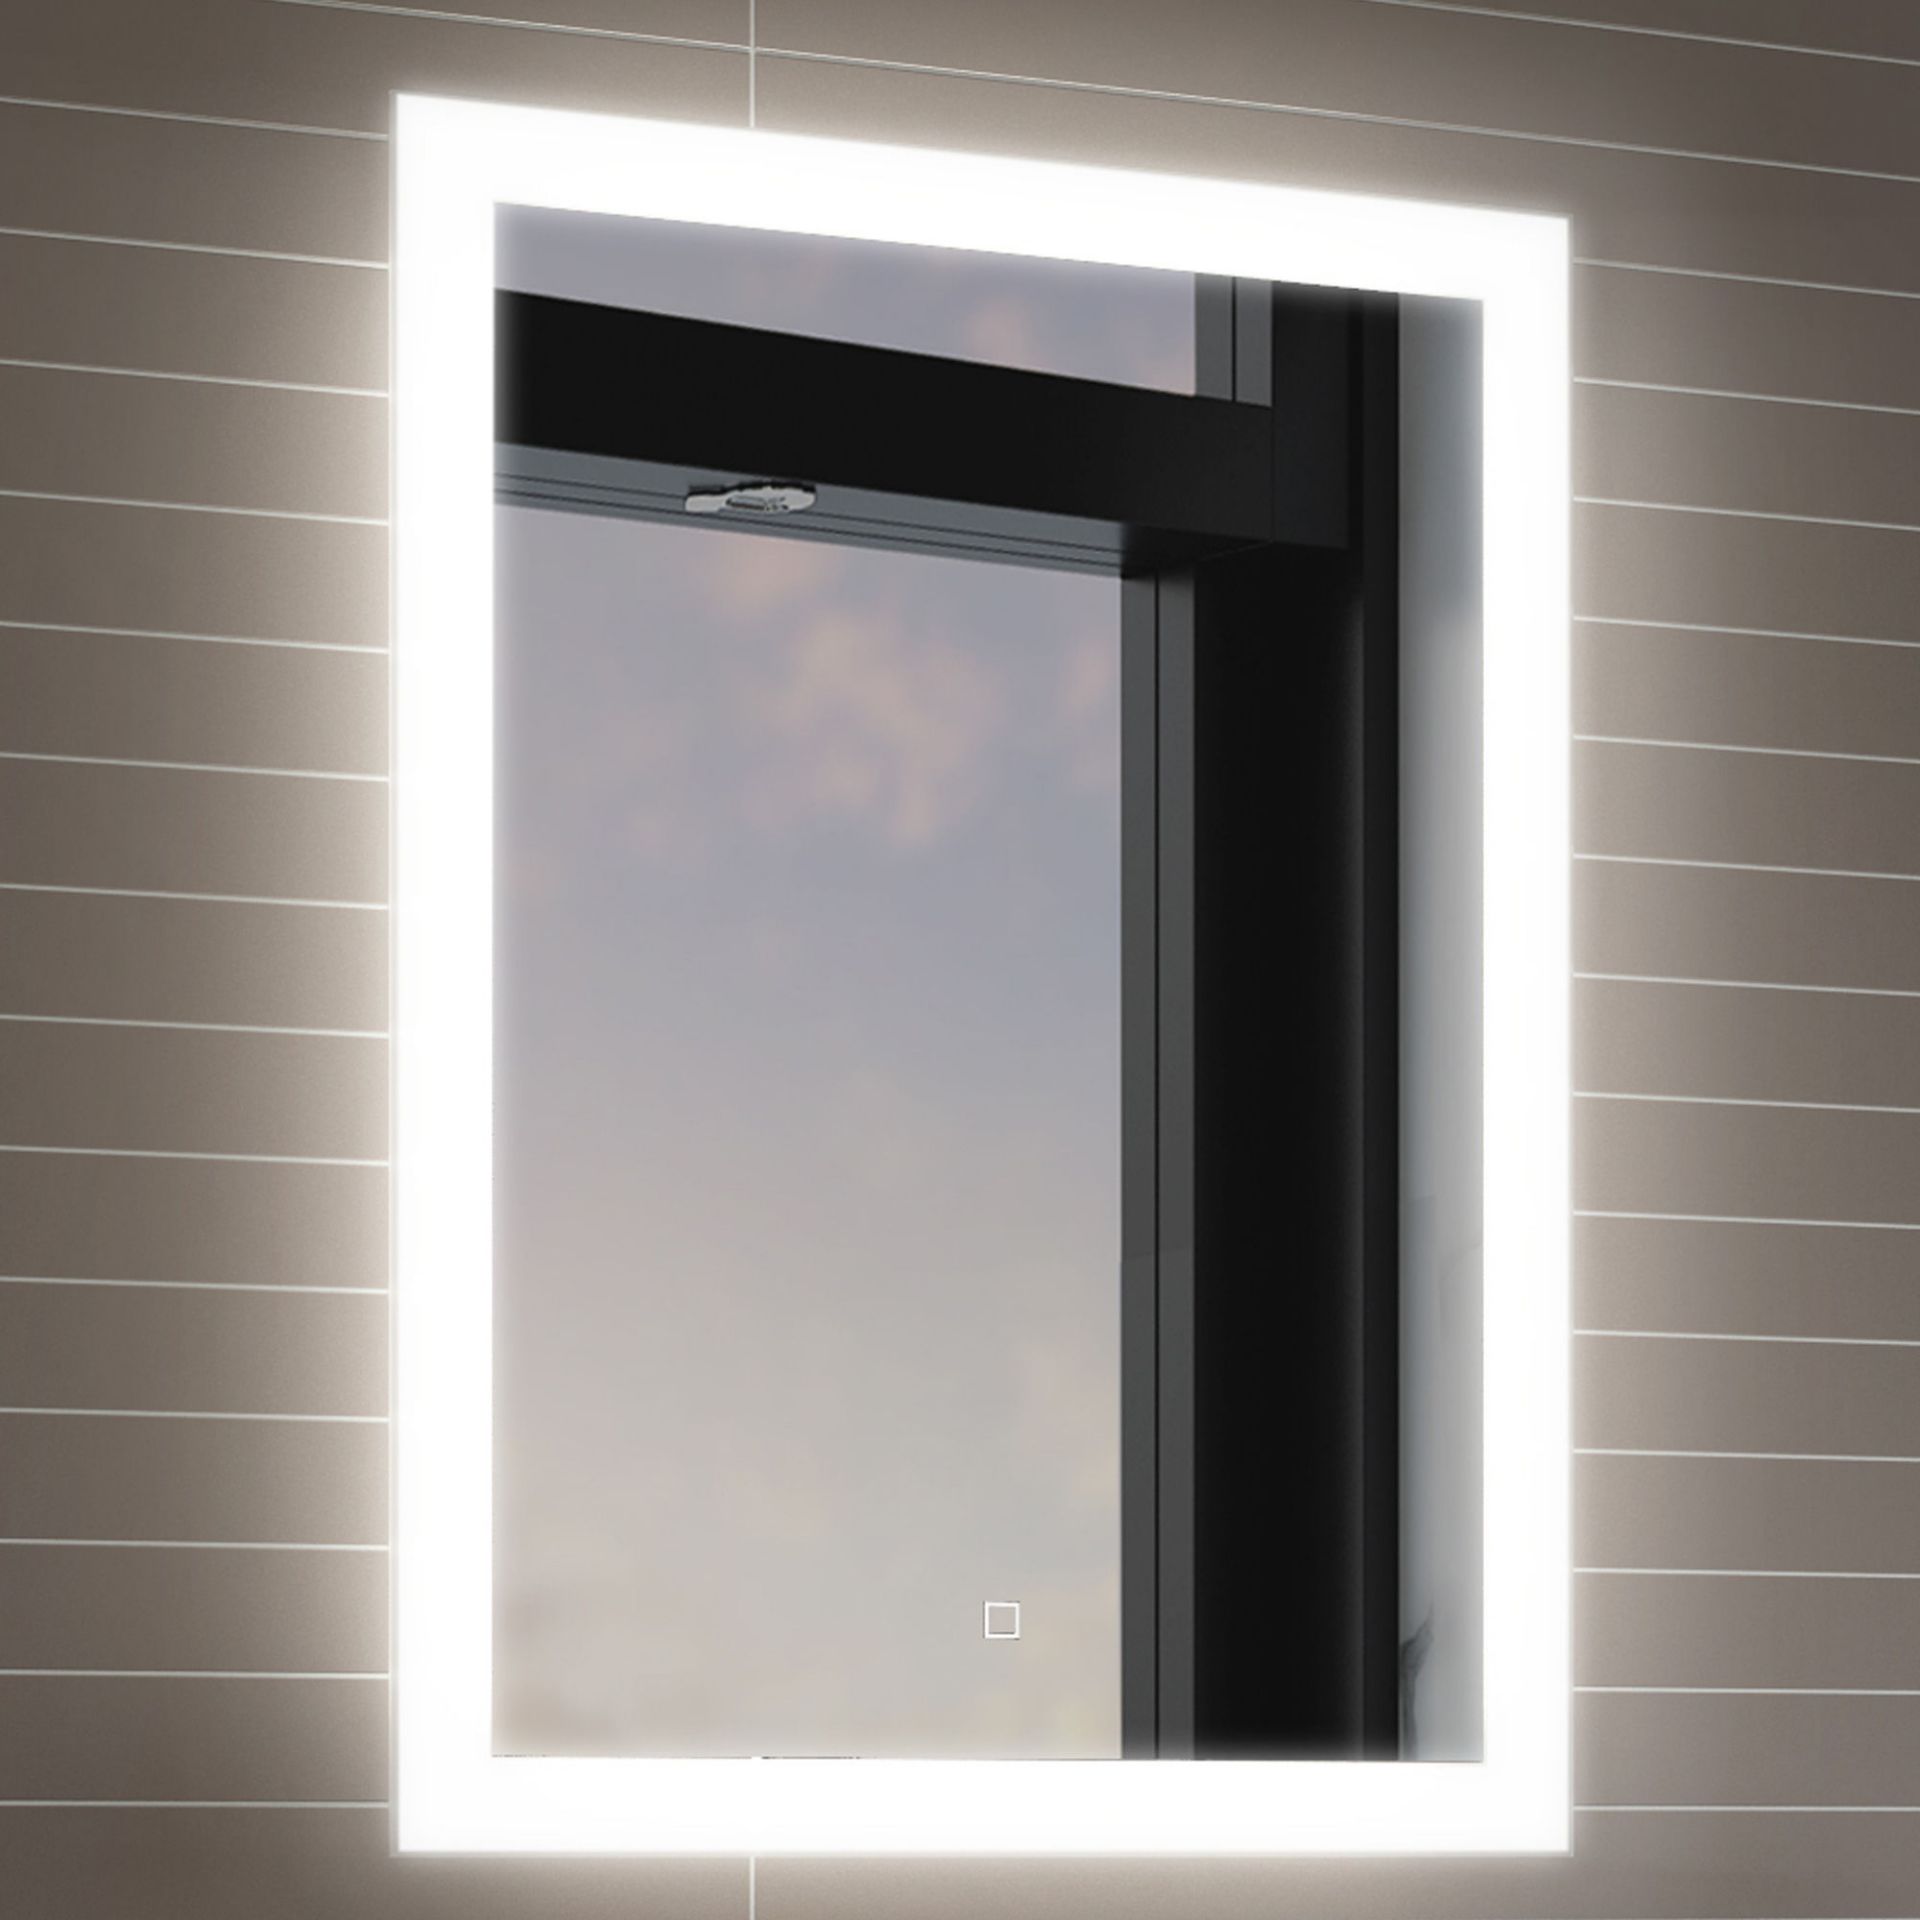 (TY133) 500x700mm Orion Illuminated LED Mirror - Switch Control. RRP £349.99. Energy efficient LED